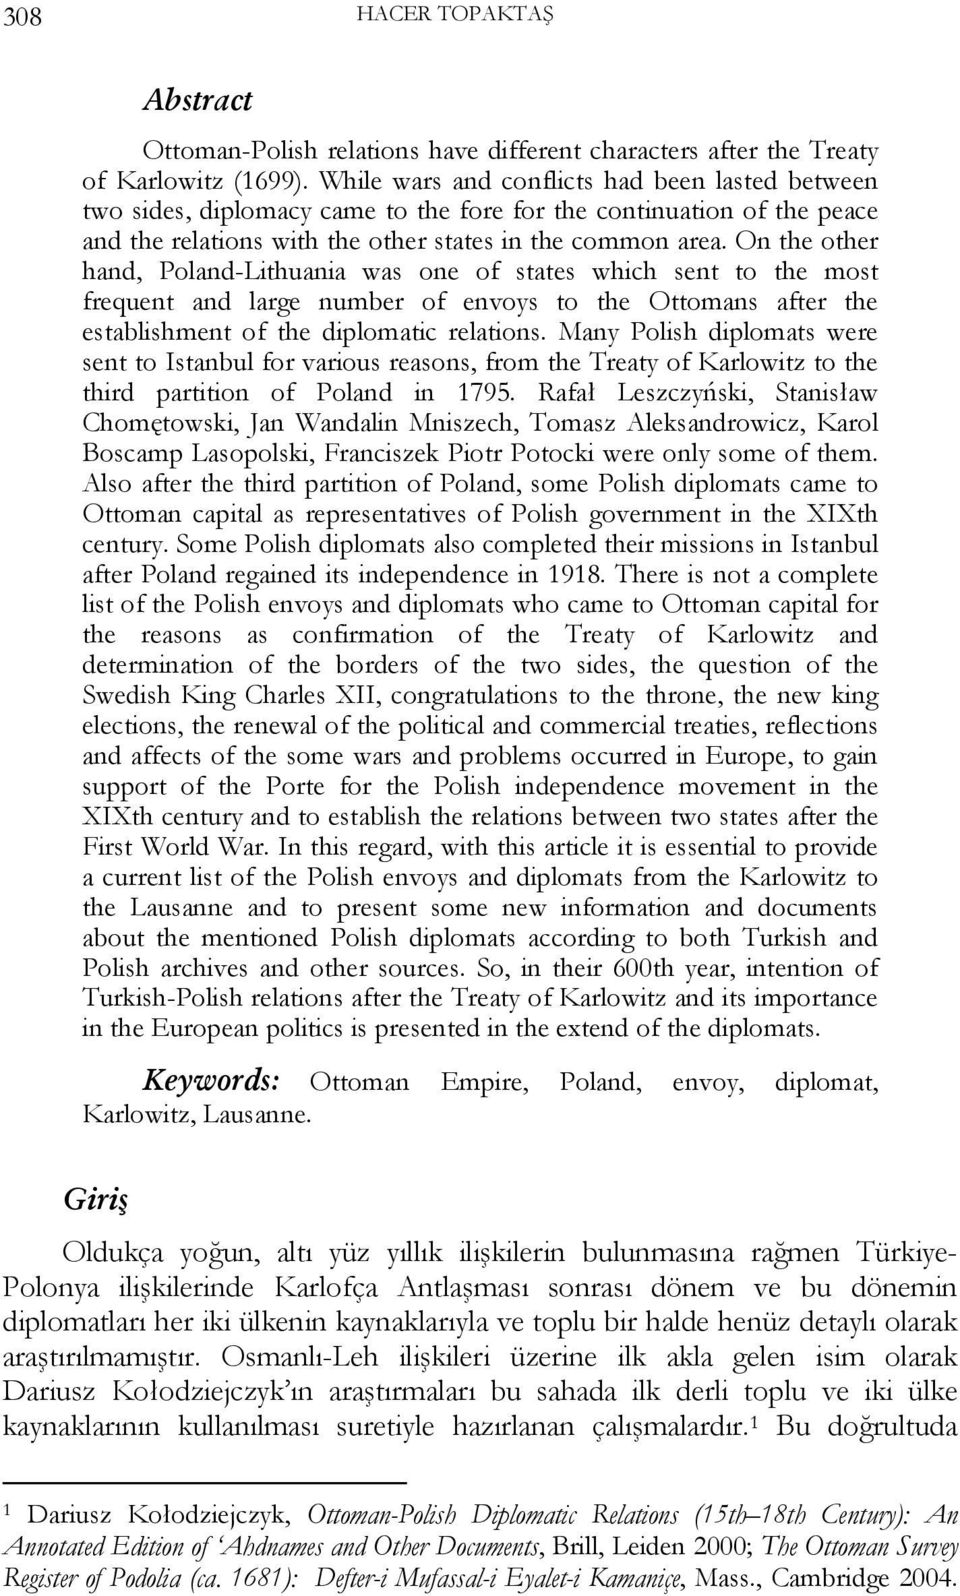 On the other hand, Poland-Lithuania was one of states which sent to the most frequent and large number of envoys to the Ottomans after the establishment of the diplomatic relations.